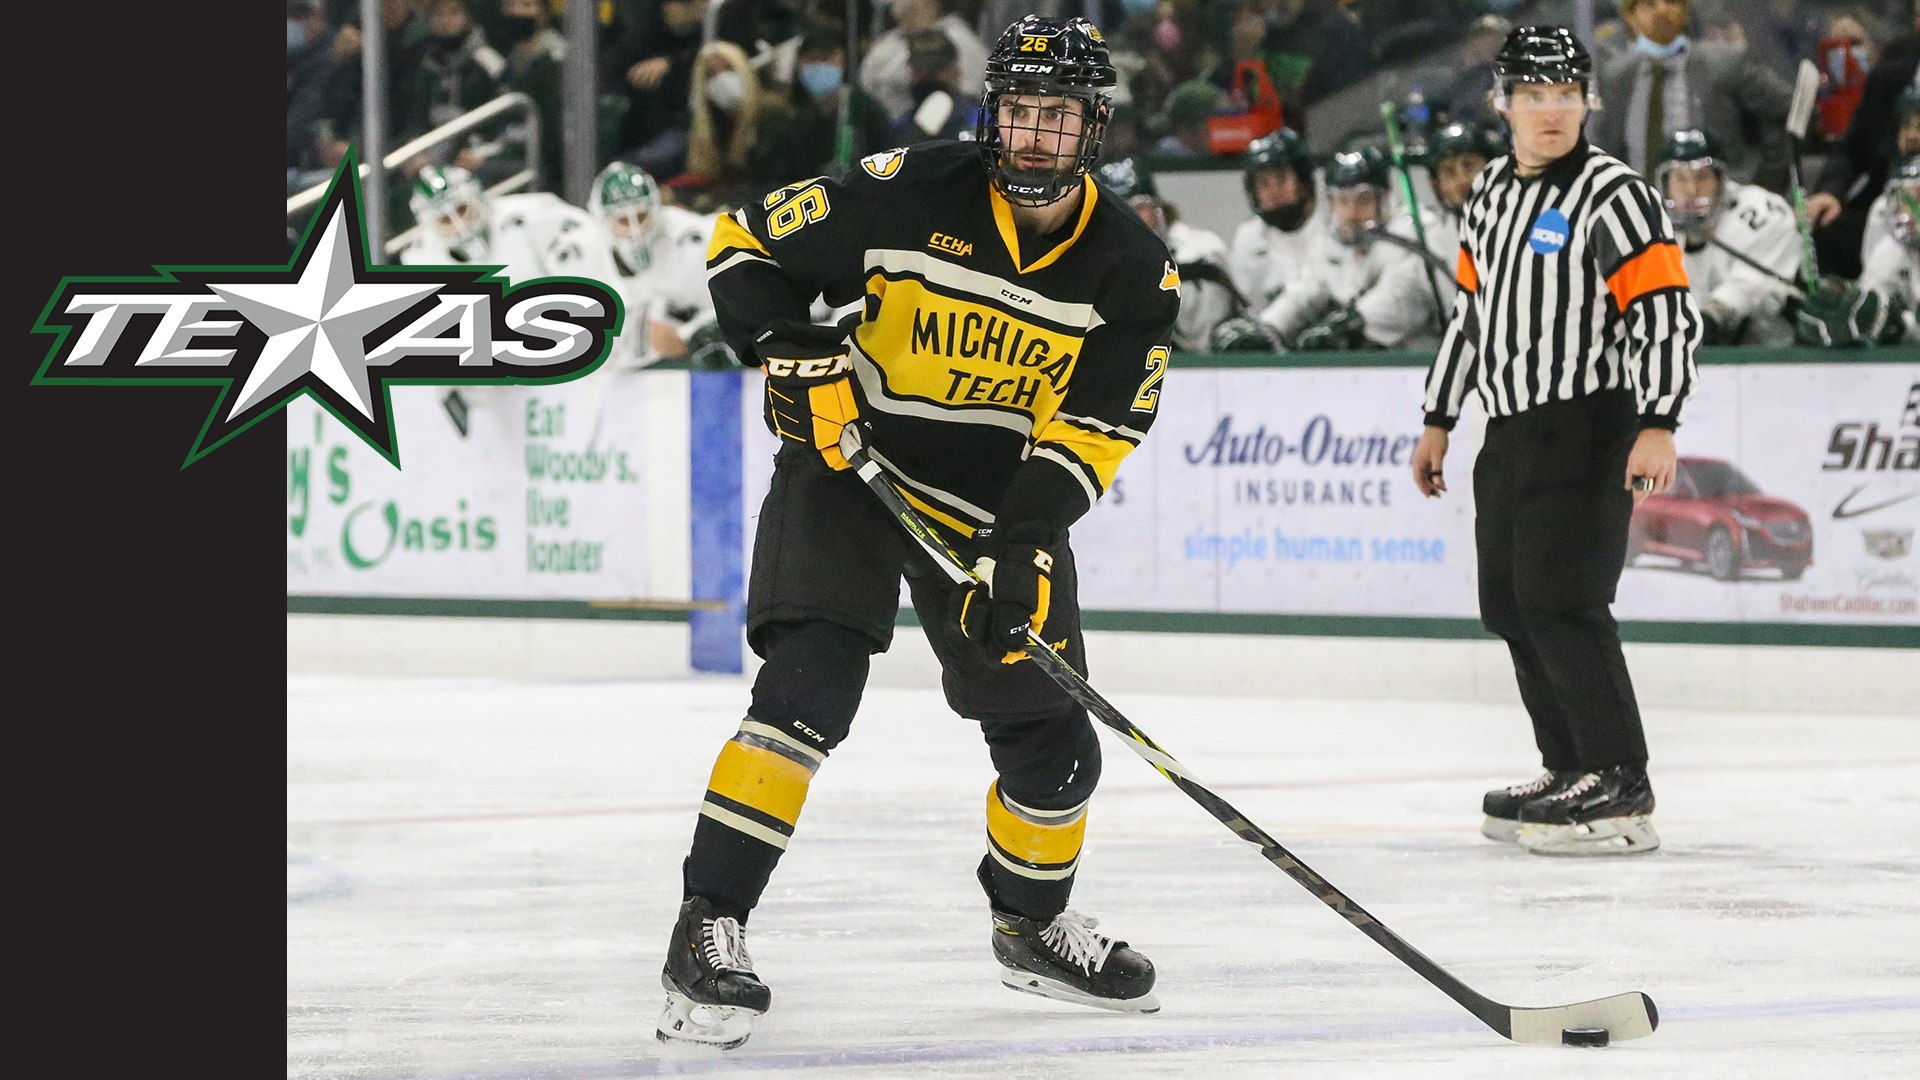 Michael Karow signs with Texas Stars in AHL